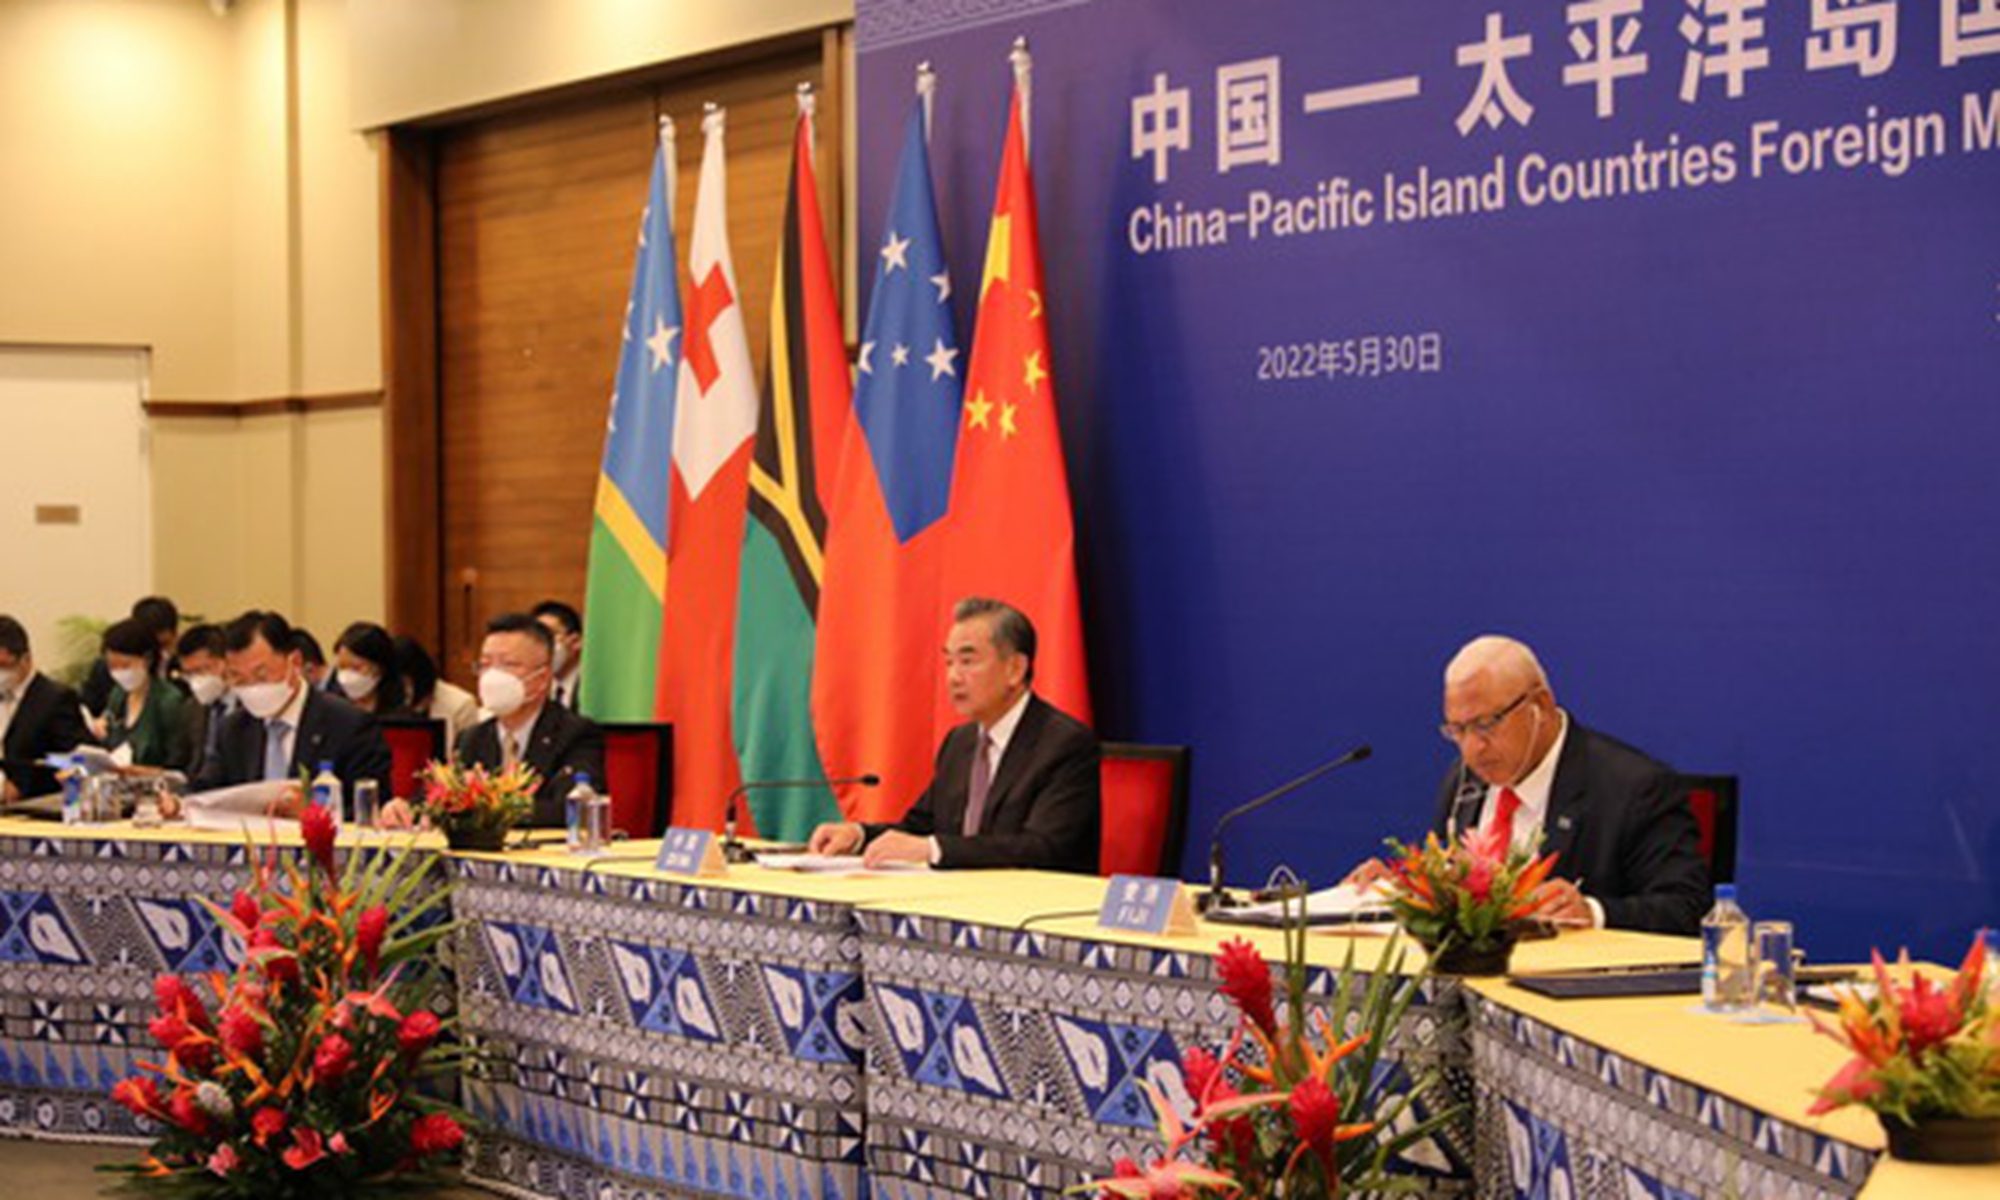 The second China-Pacific Island Countries Foreign Ministers' Meeting is held on May 30, 2022. Photo: Chinese Foreign Ministry website 